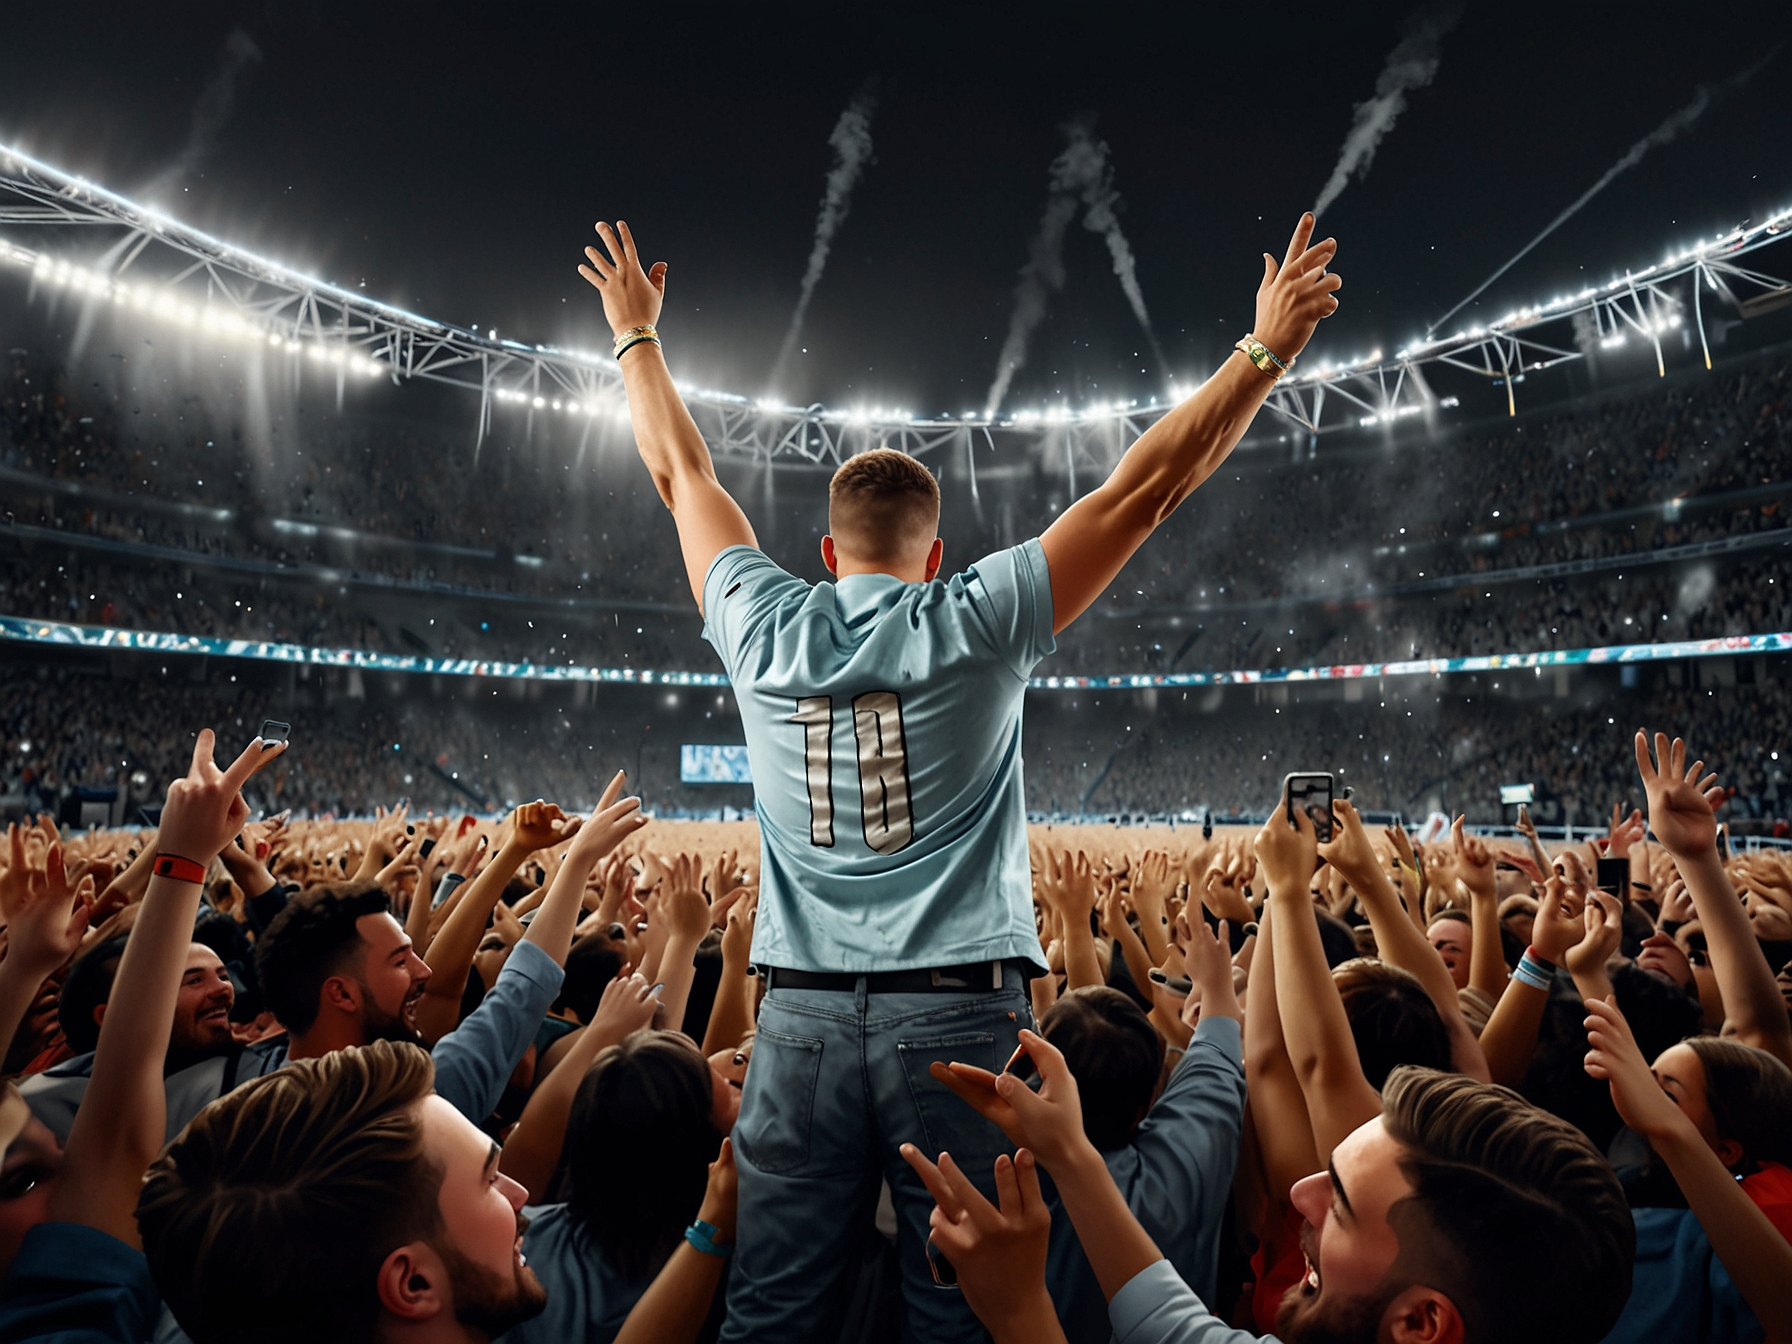 Travis Kelce in the crowd at Wembley Stadium during Taylor Swift's Eras Tour show, performing his signature invisible bow and arrow move and dancing, capturing fans' excitement.